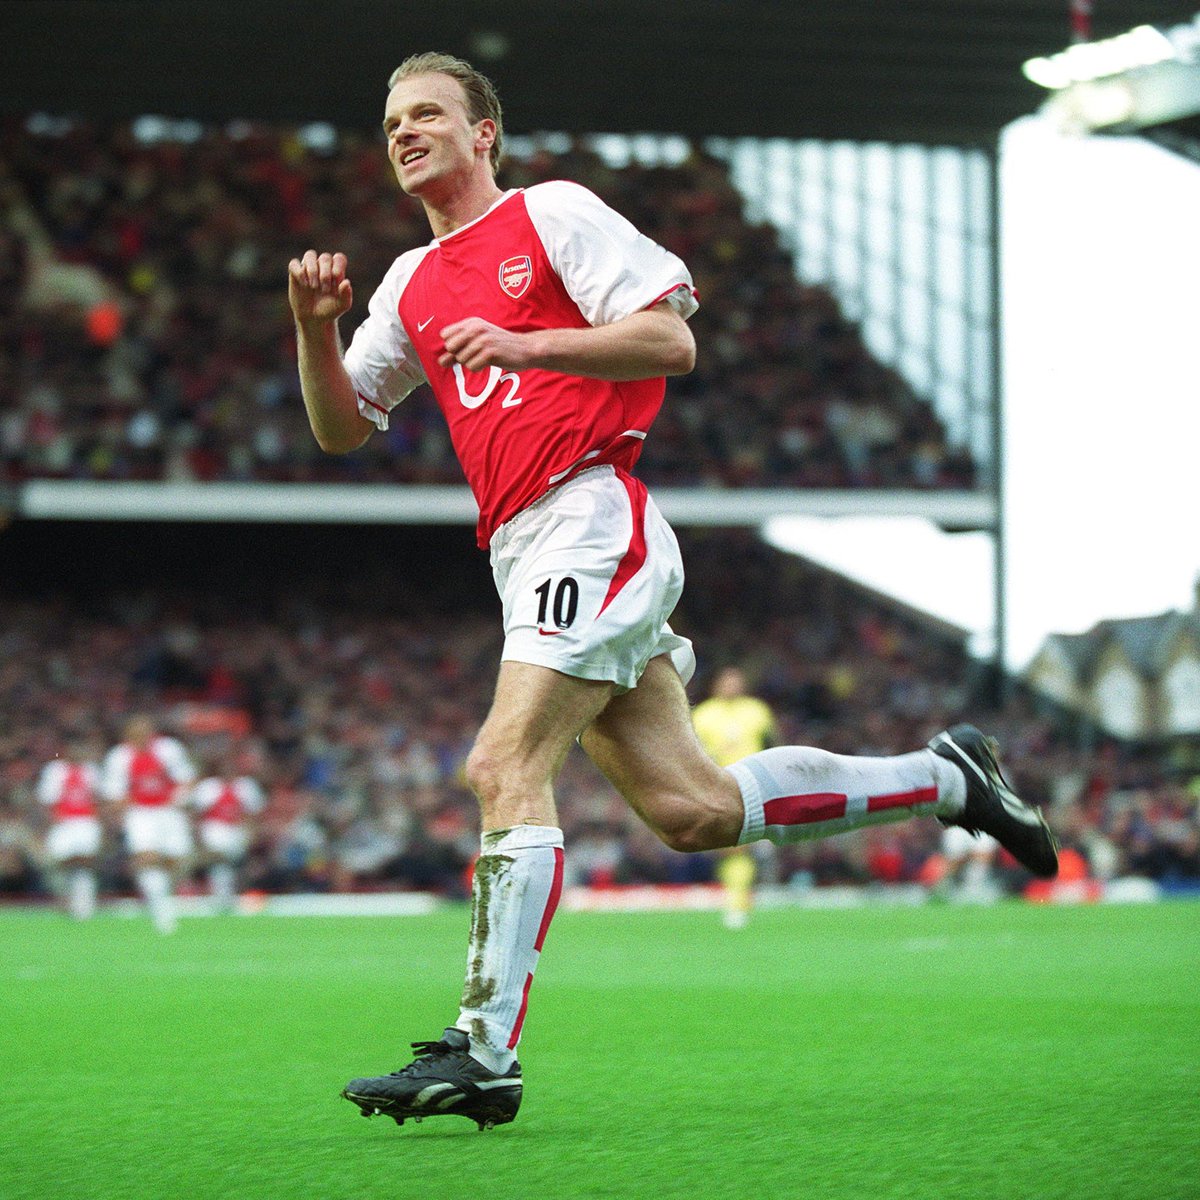 🎁 To celebrate his birthday... Which Bergkamp goal do you want to see? 💭